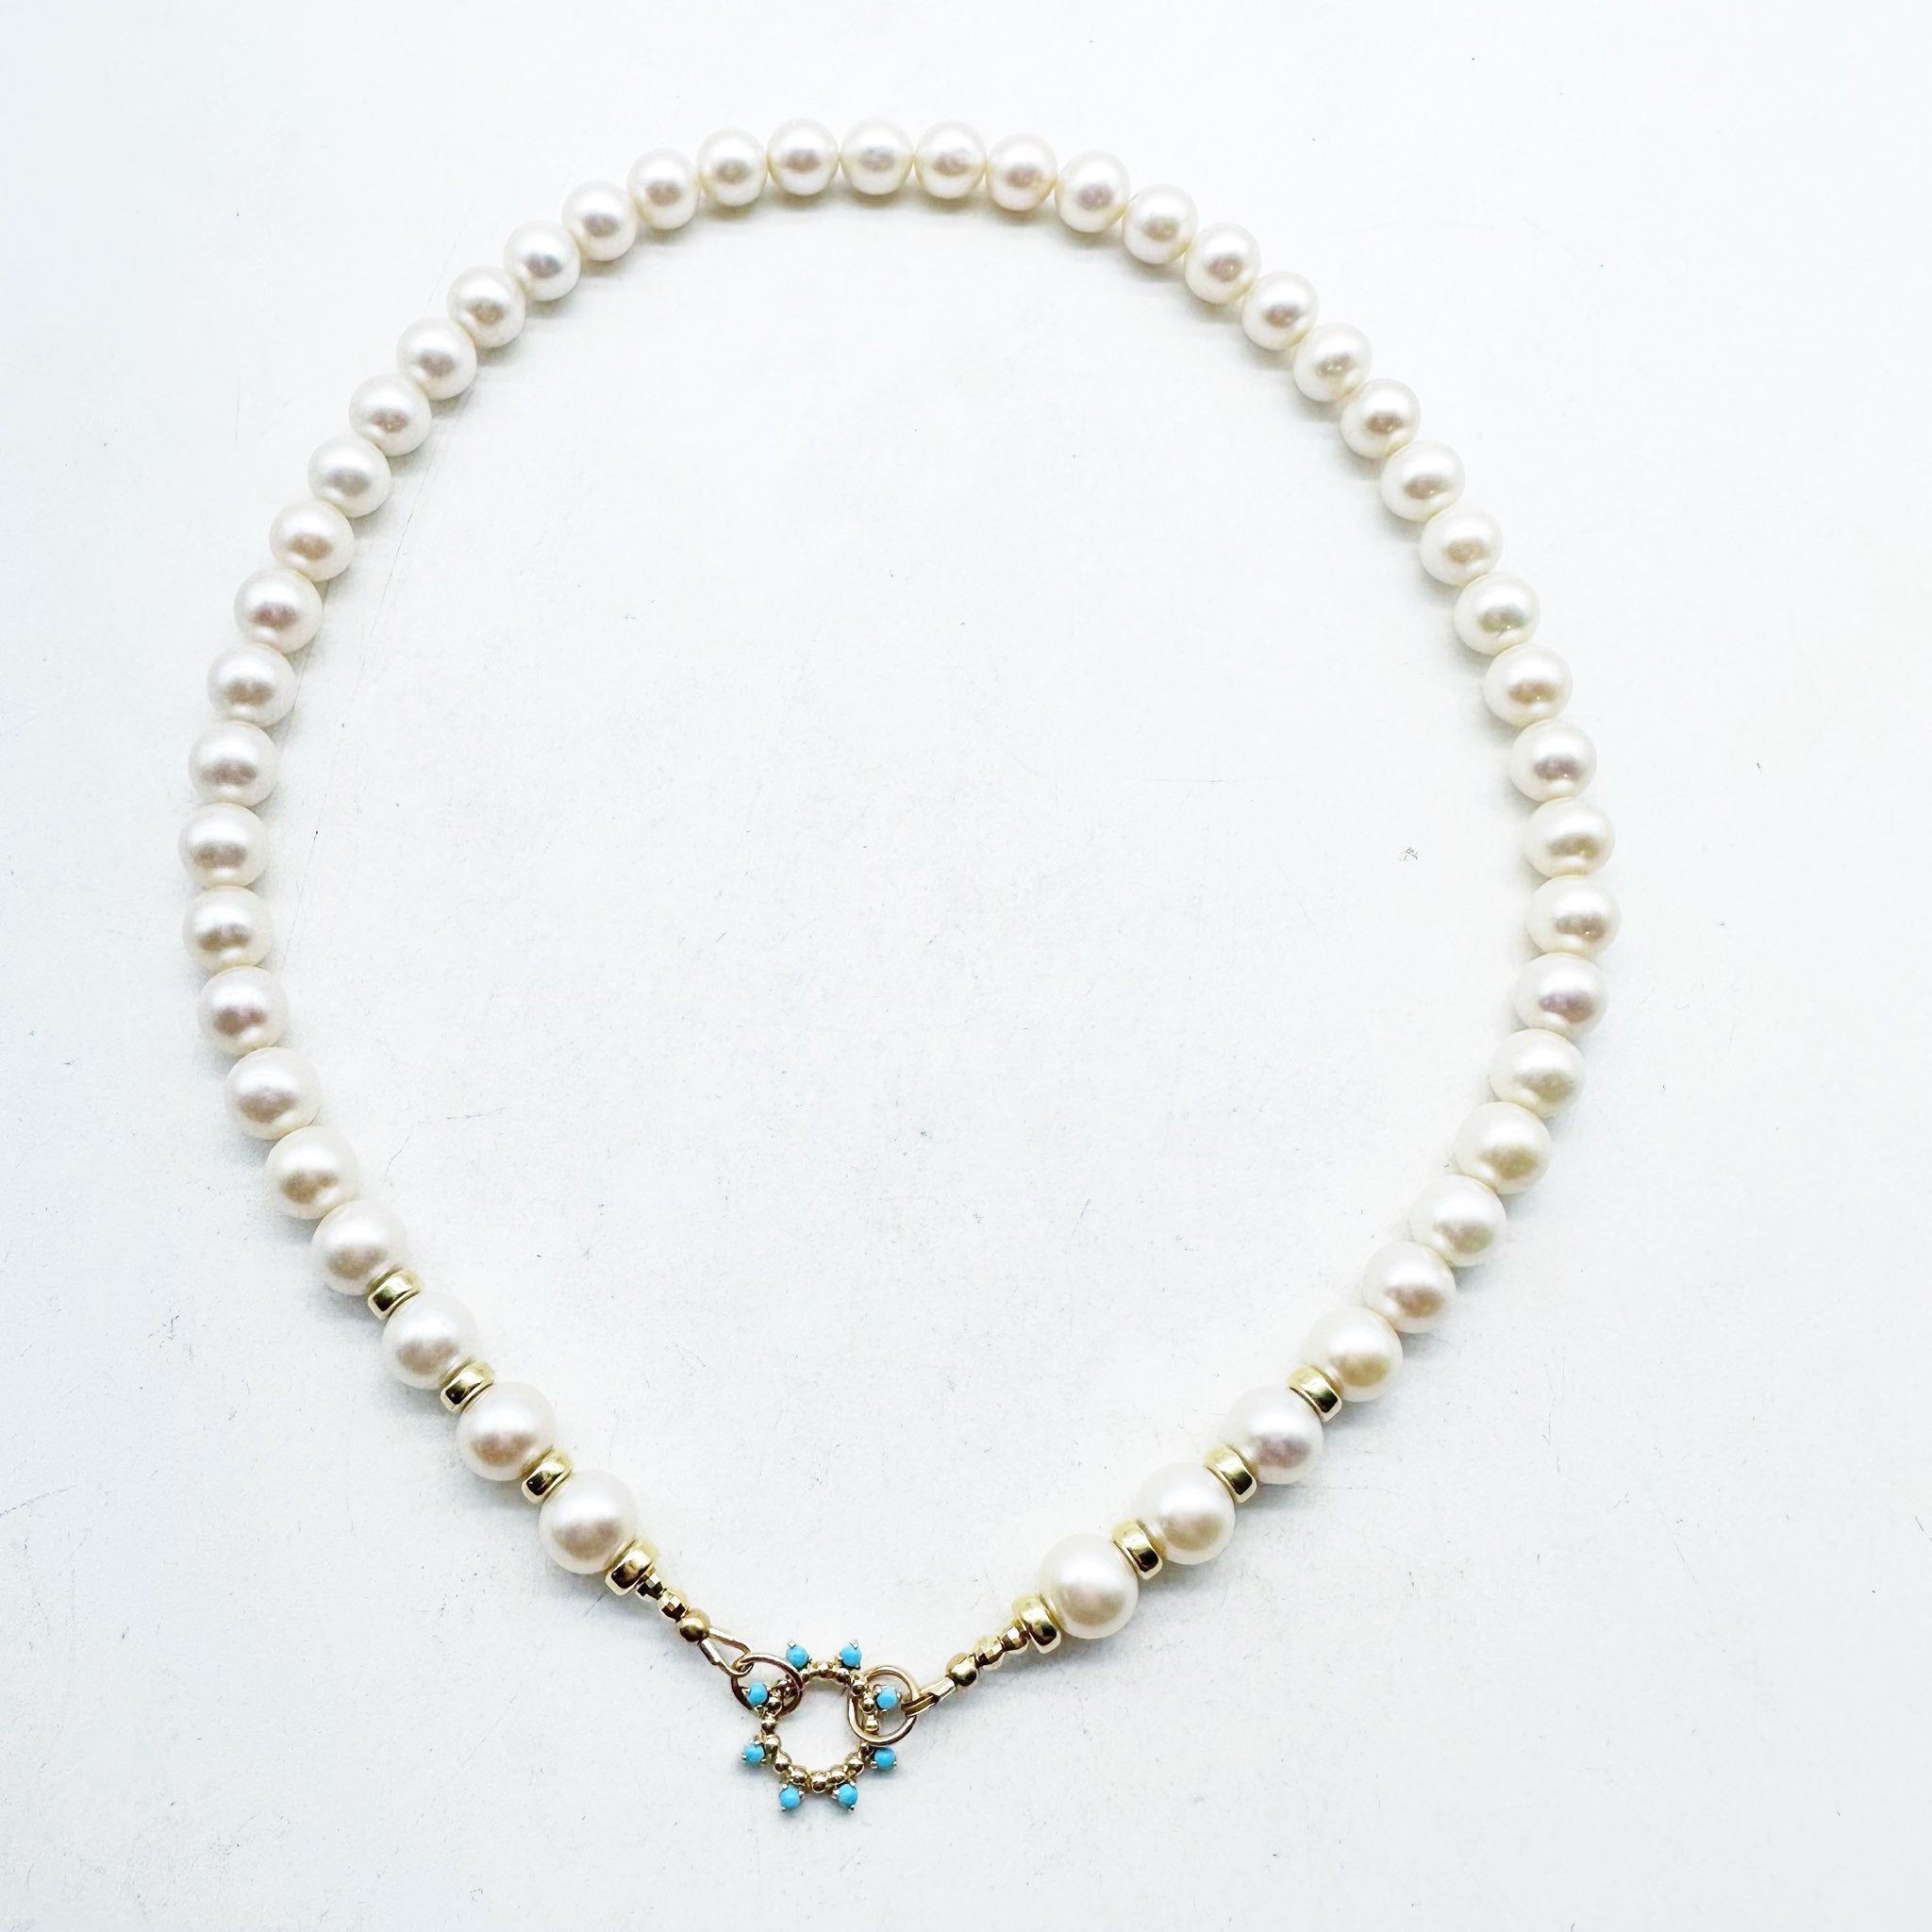 FRESH WATER PEARL NECKLACE WITH 14K GOLD